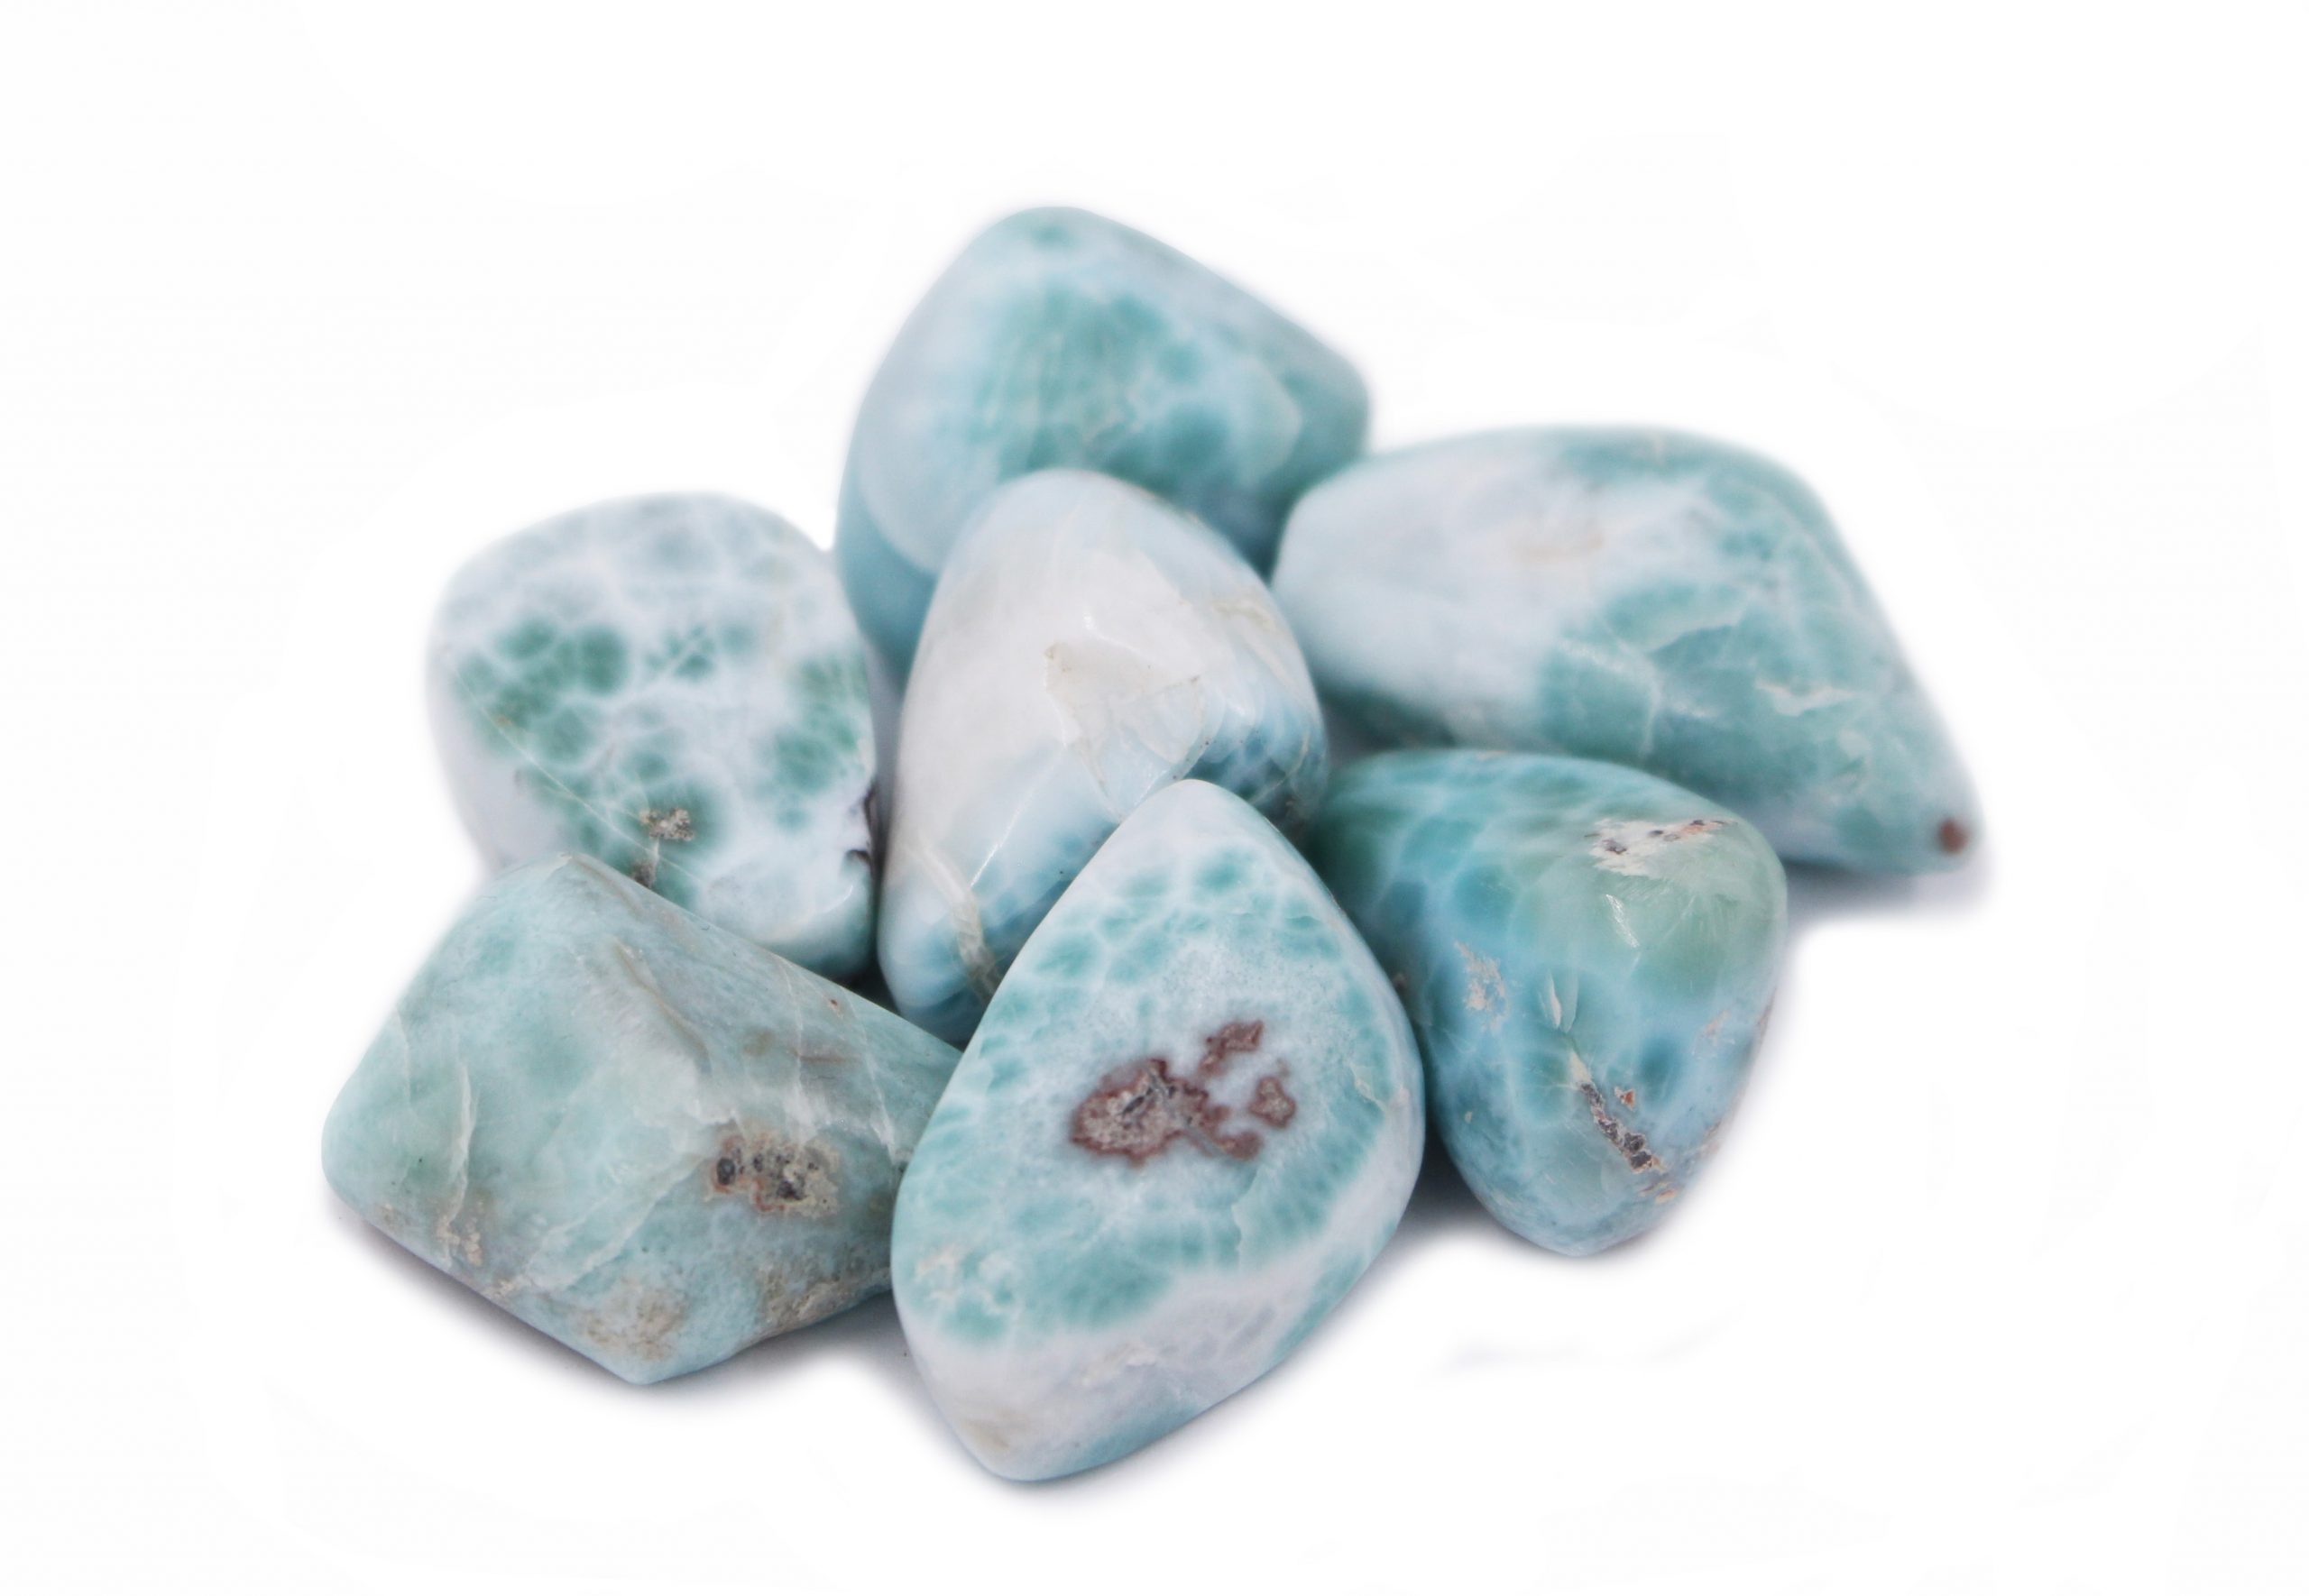 Larimar Gemstone - Meaning, Uses, And Benefits